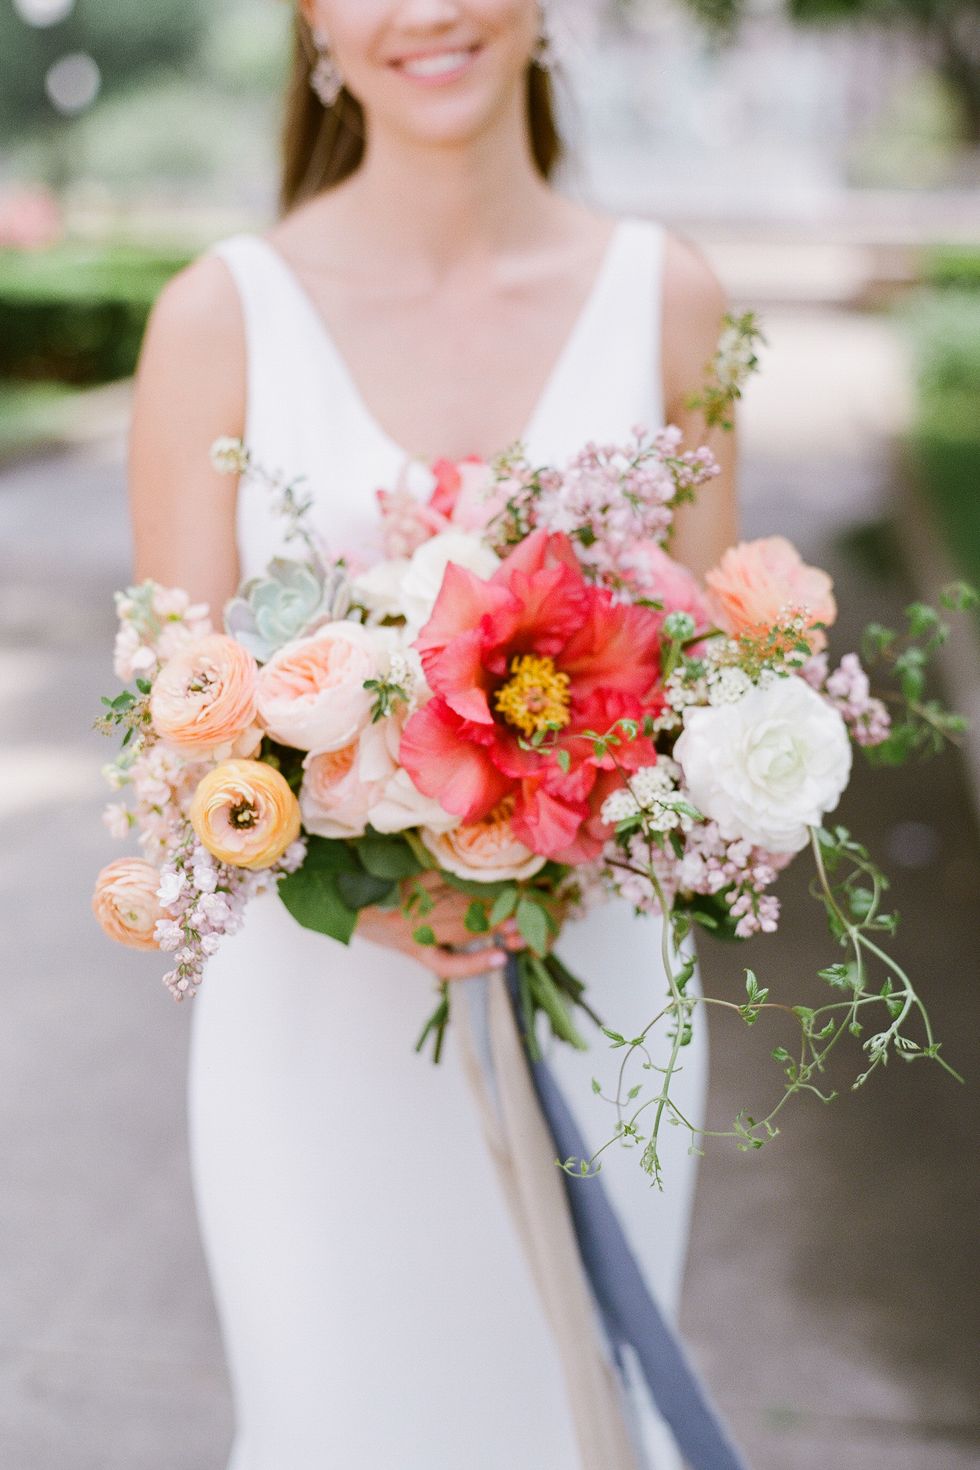 The 15 Most Popular Wedding Flowers to Inspire Your Dream Bouquet